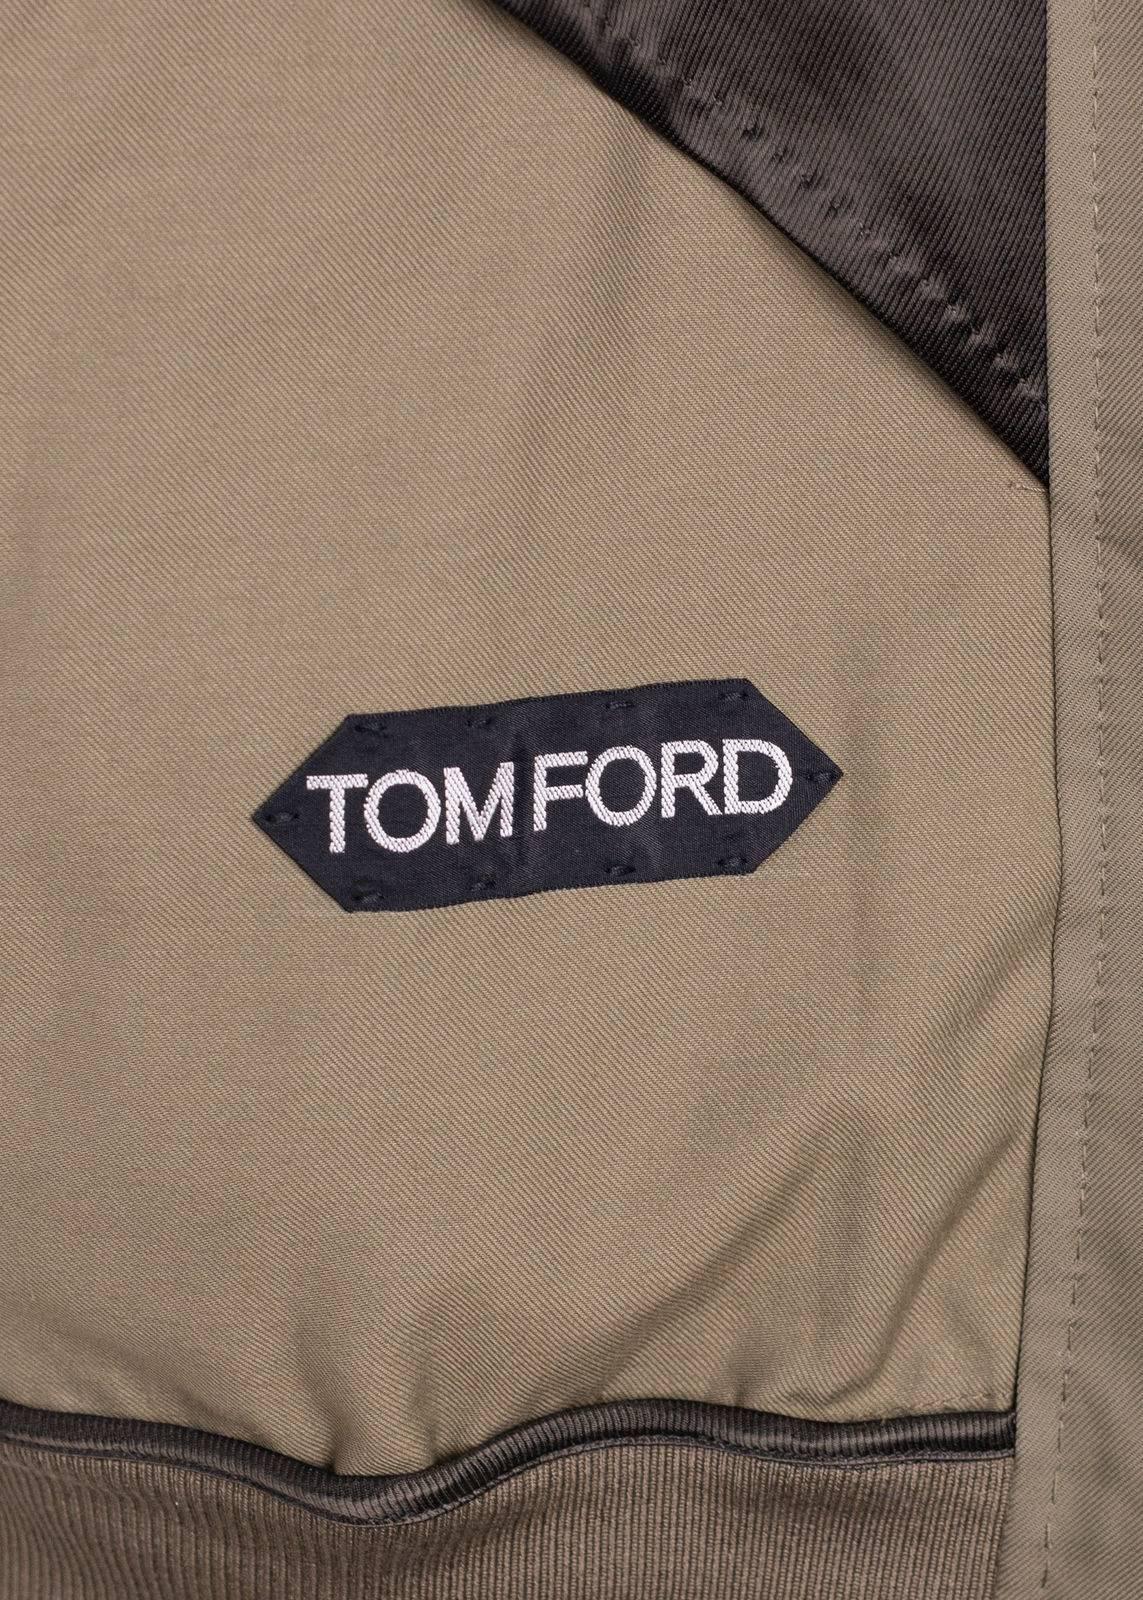 Tom Ford Men Brown Cotton Blend Sartorial Zip Jacket Size 48/38~RTL$3550 In Excellent Condition For Sale In Brooklyn, NY